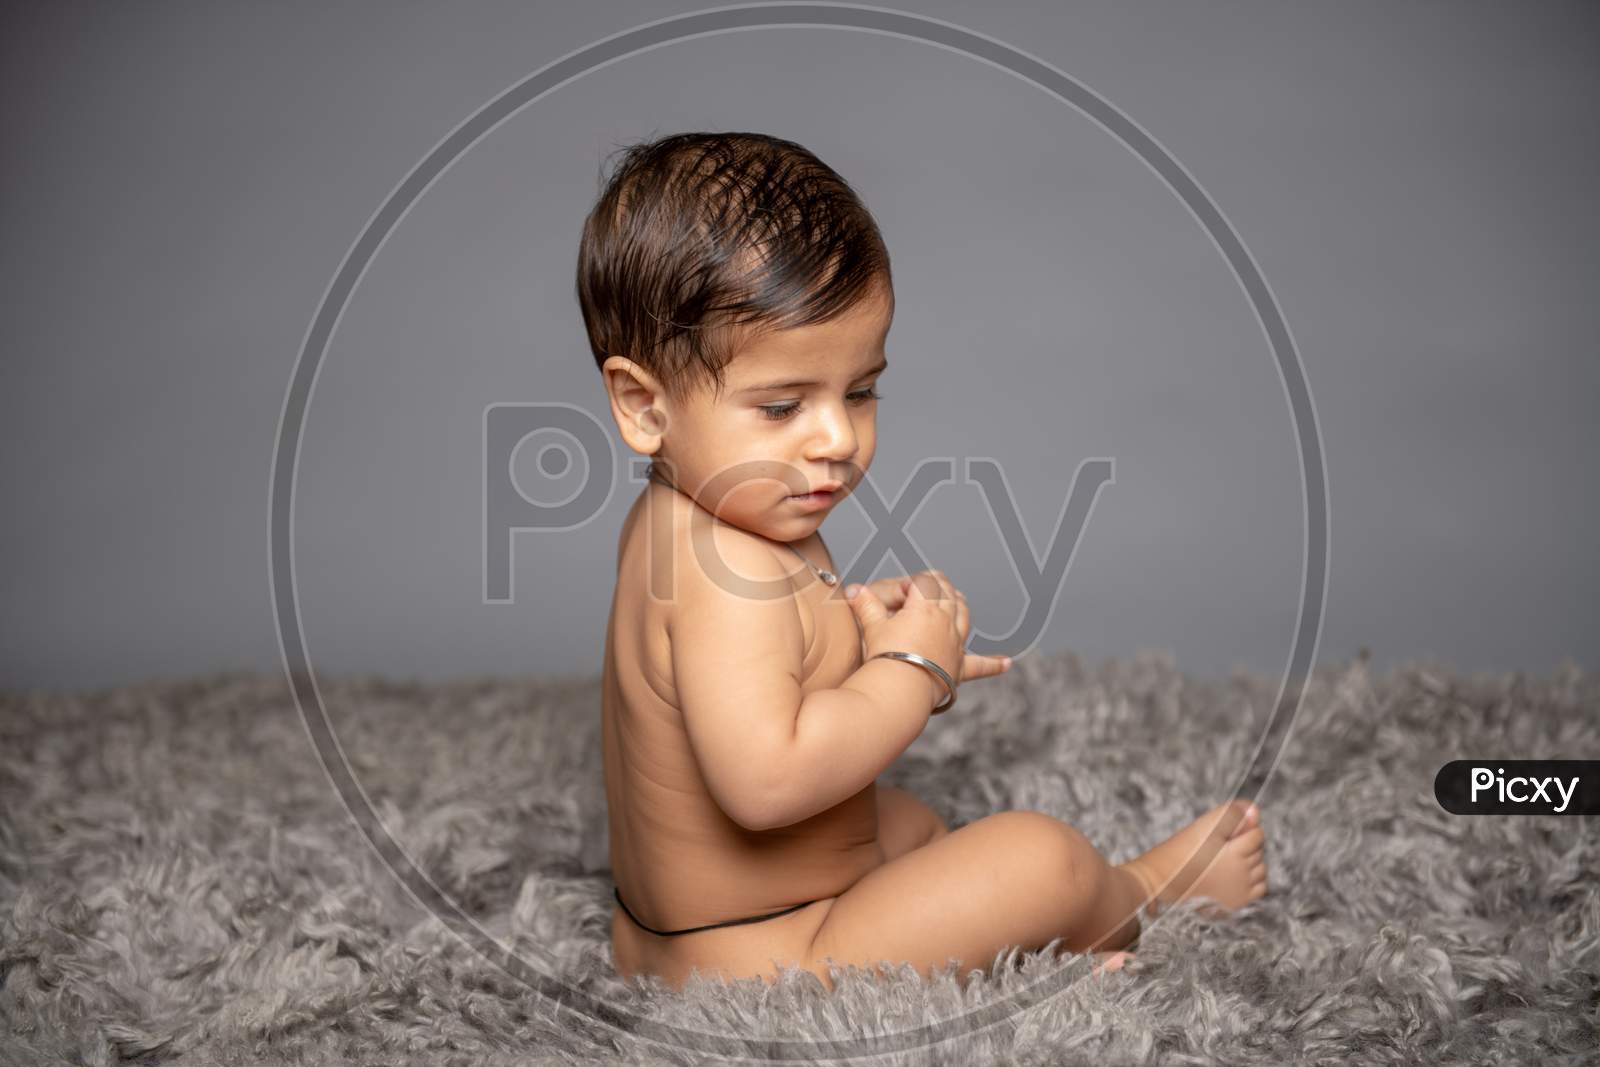 Adorable Cute Little Girl Child Playing  over a Gray Background